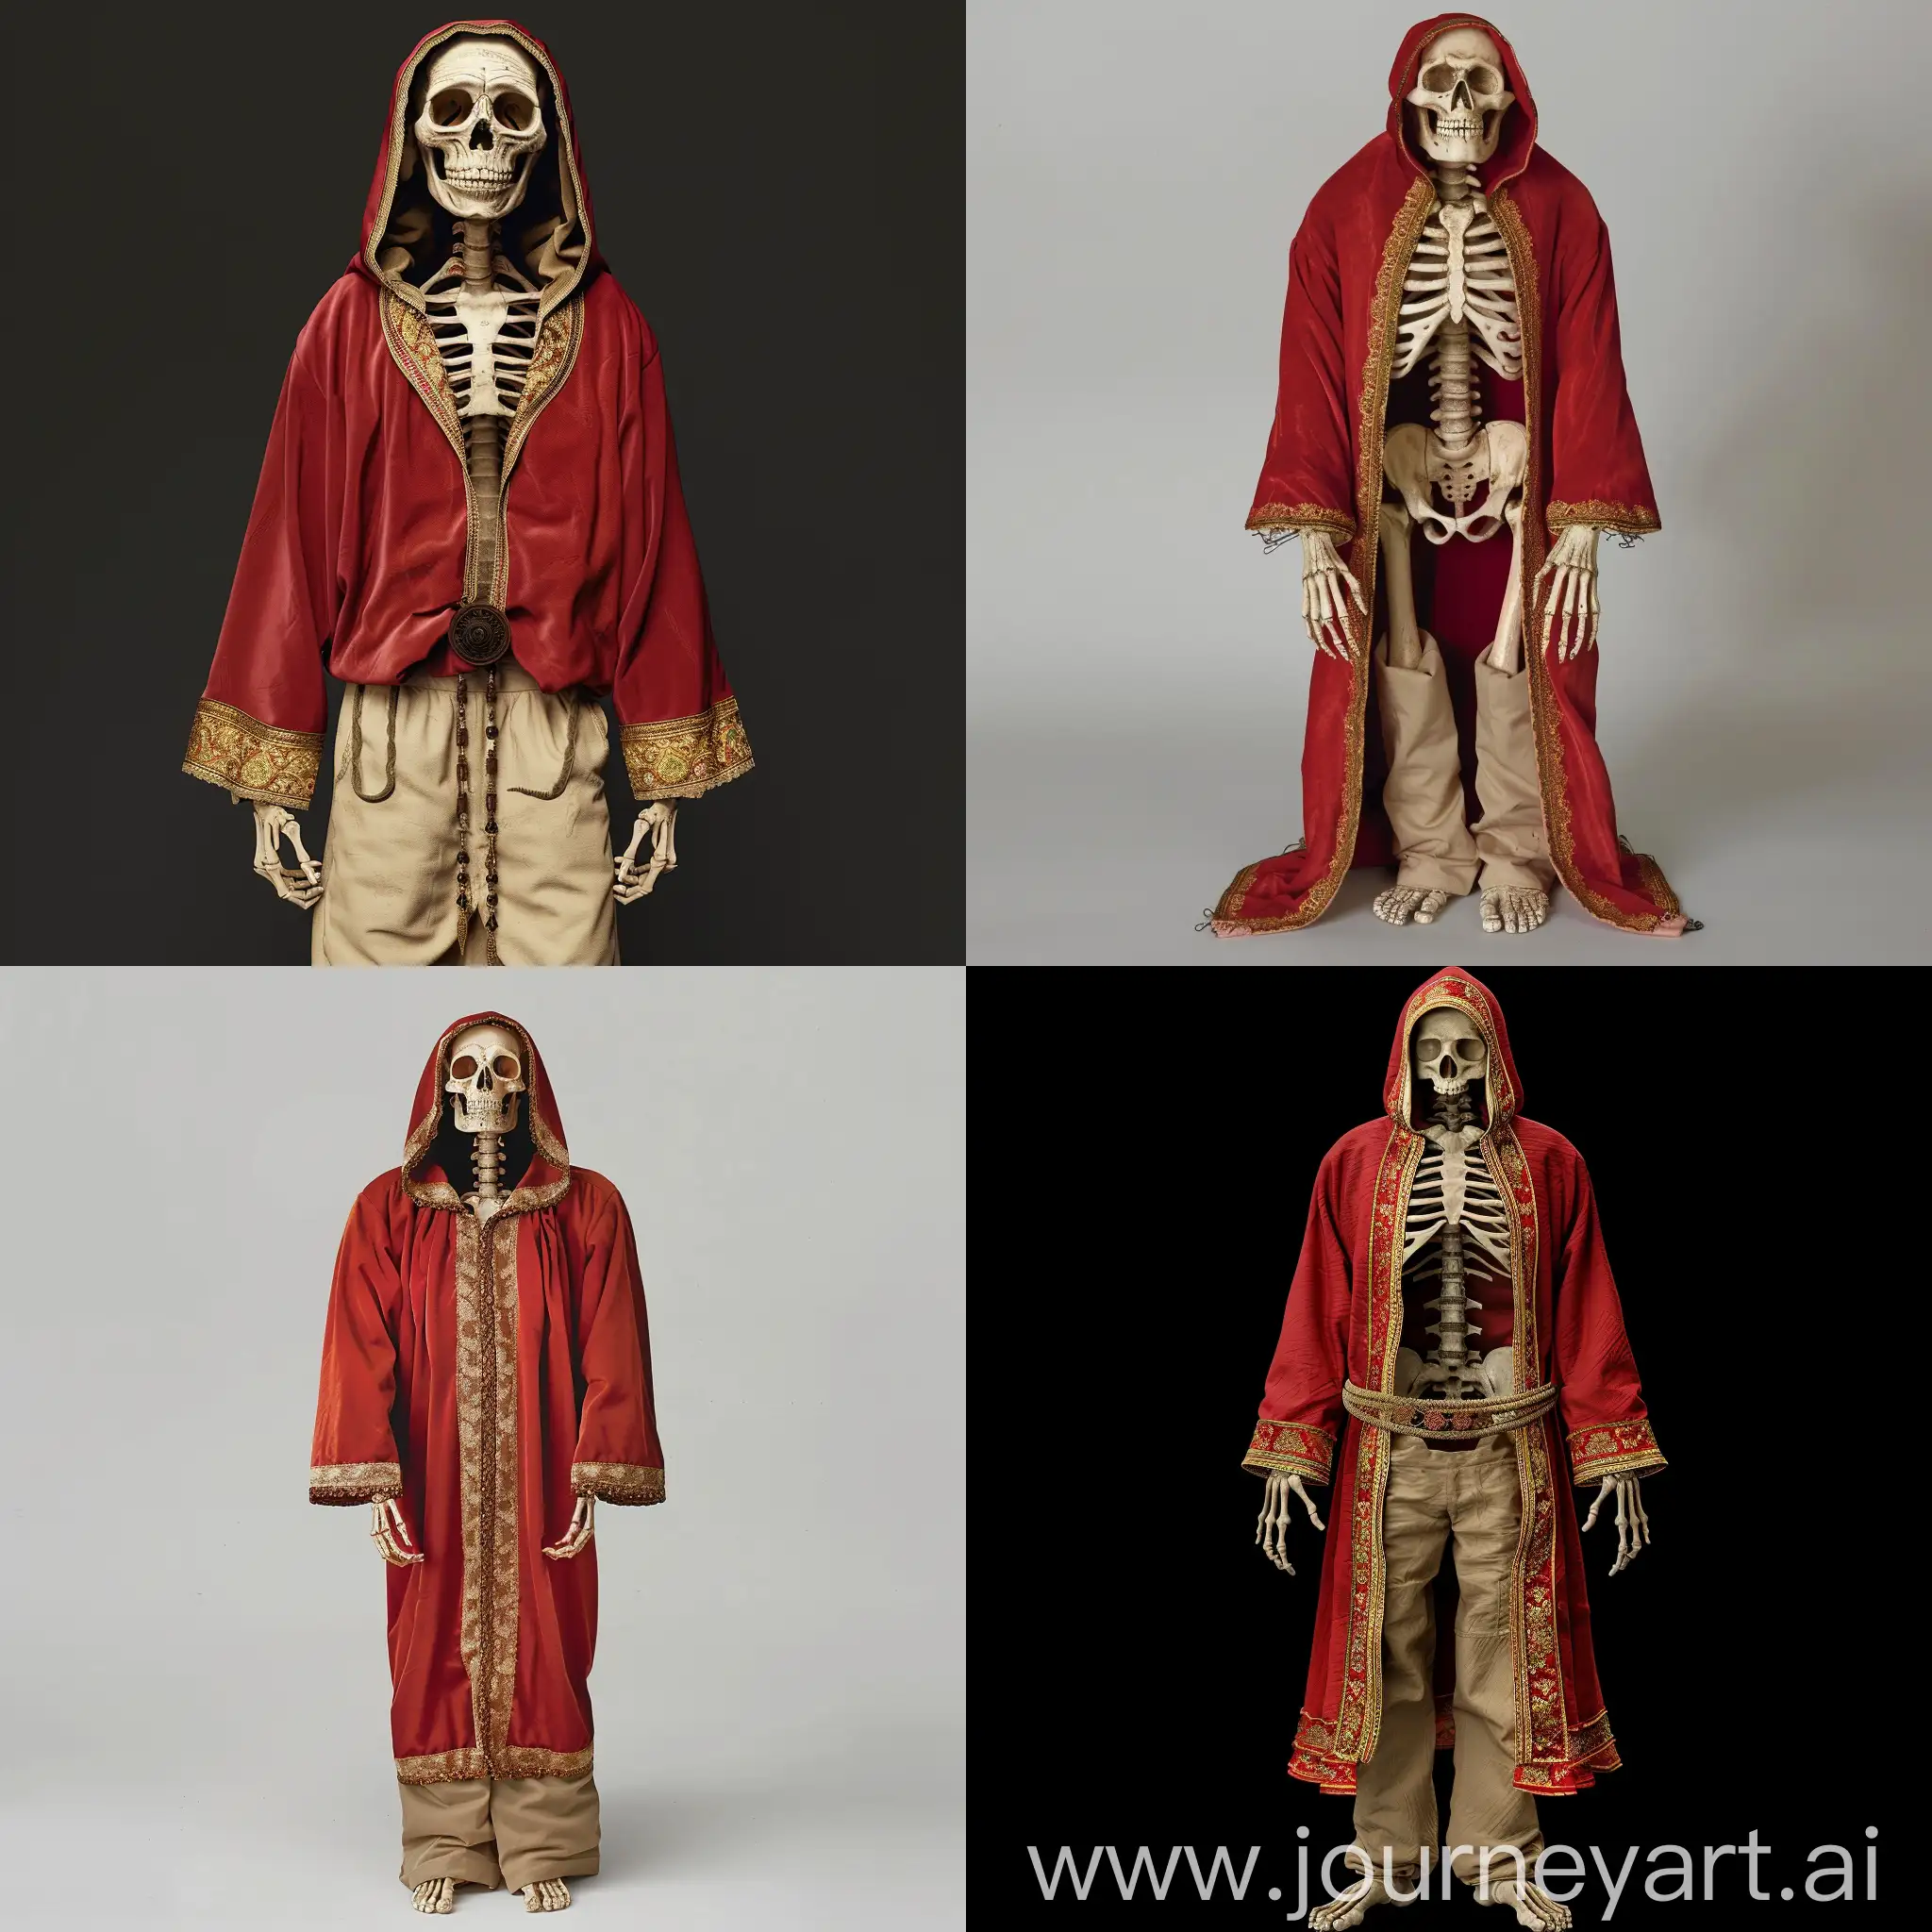 A skeleton in a red robe with a gold border with a hood, beige pants